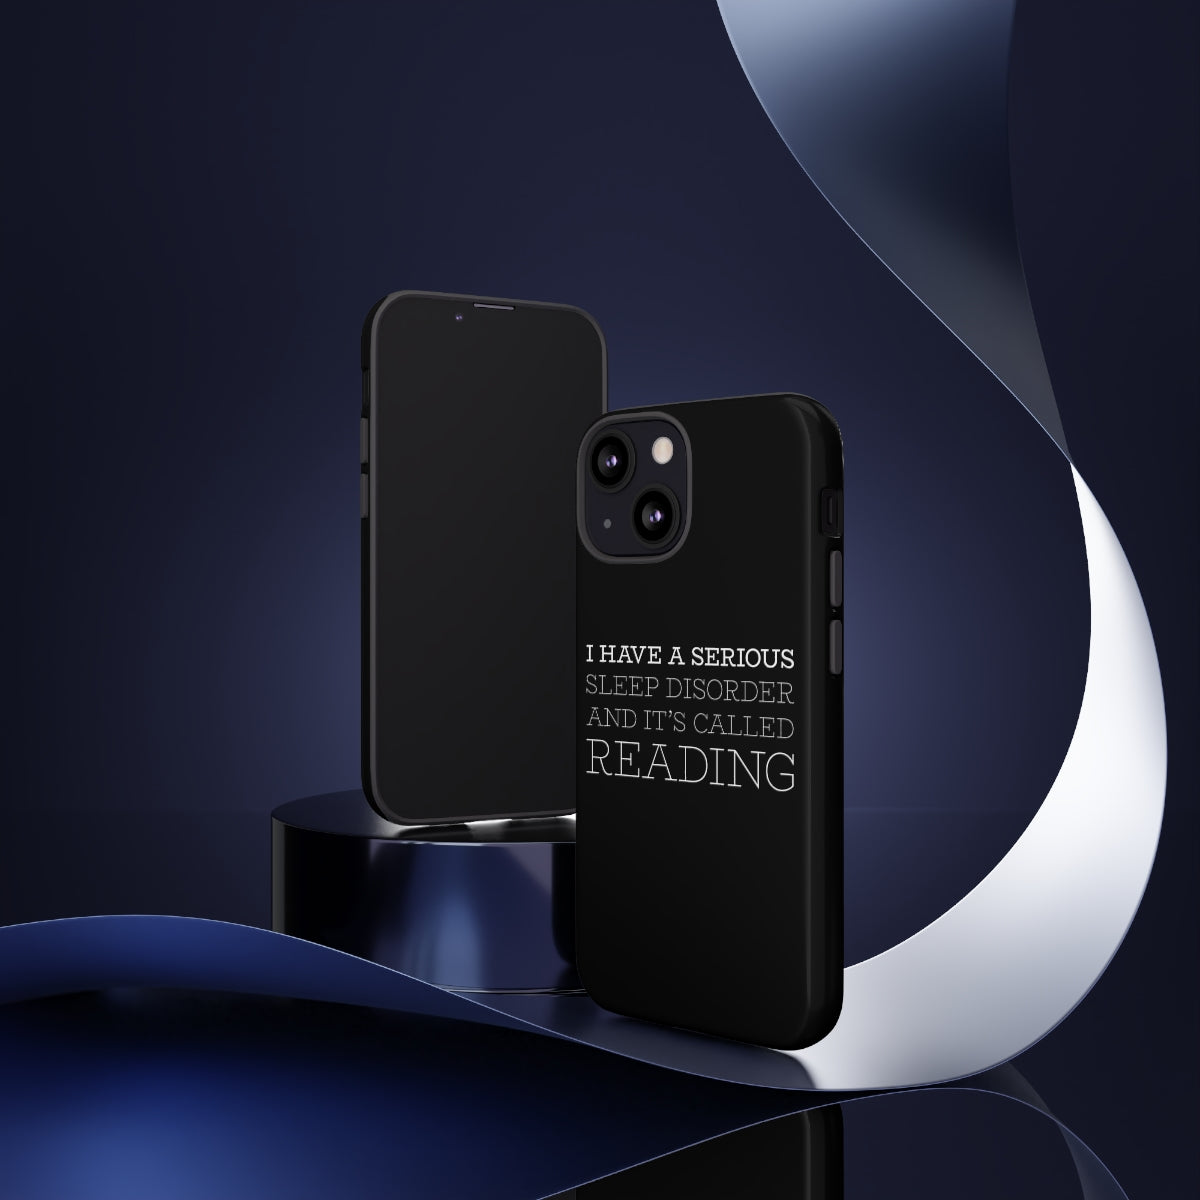 I HAVE A SERIOUS SLEEP DISORDER Phone Case - Literary Lifestyle Company